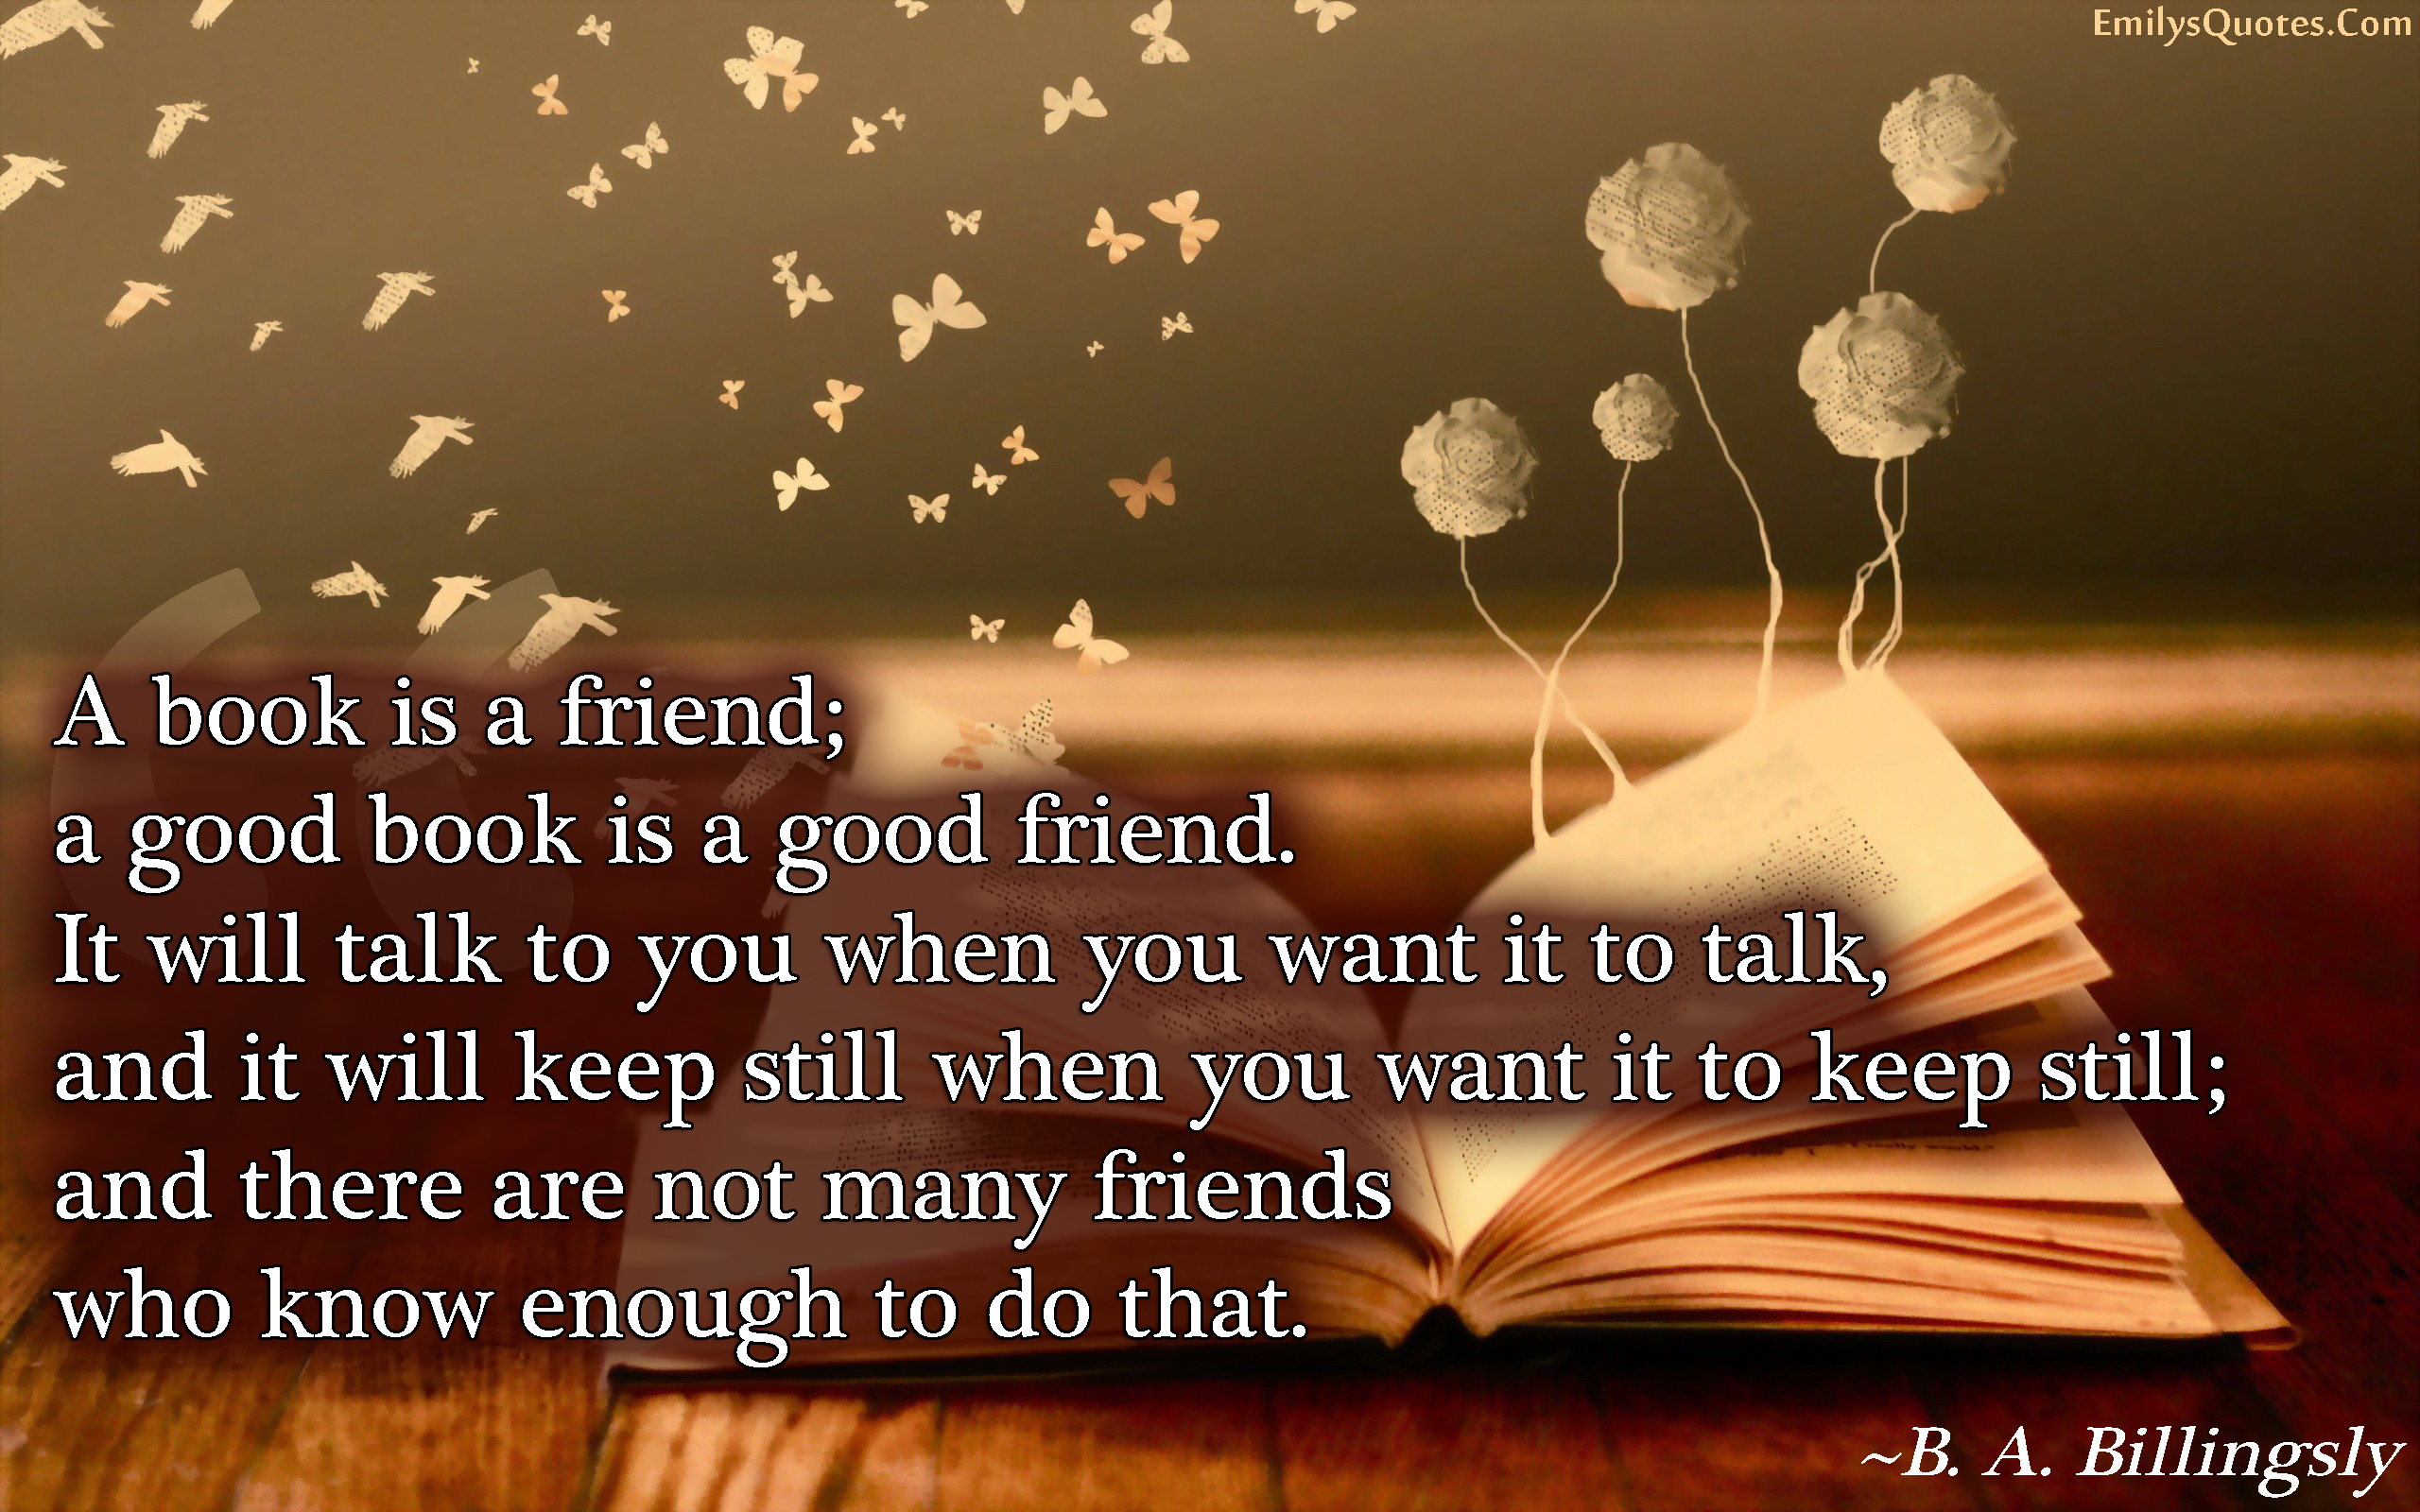 A book is a friend; a good book is a good friend. It will talk to you when you want it to talk, and it will keep still when you want it to keep still; and there are not many friends who know enough to do that